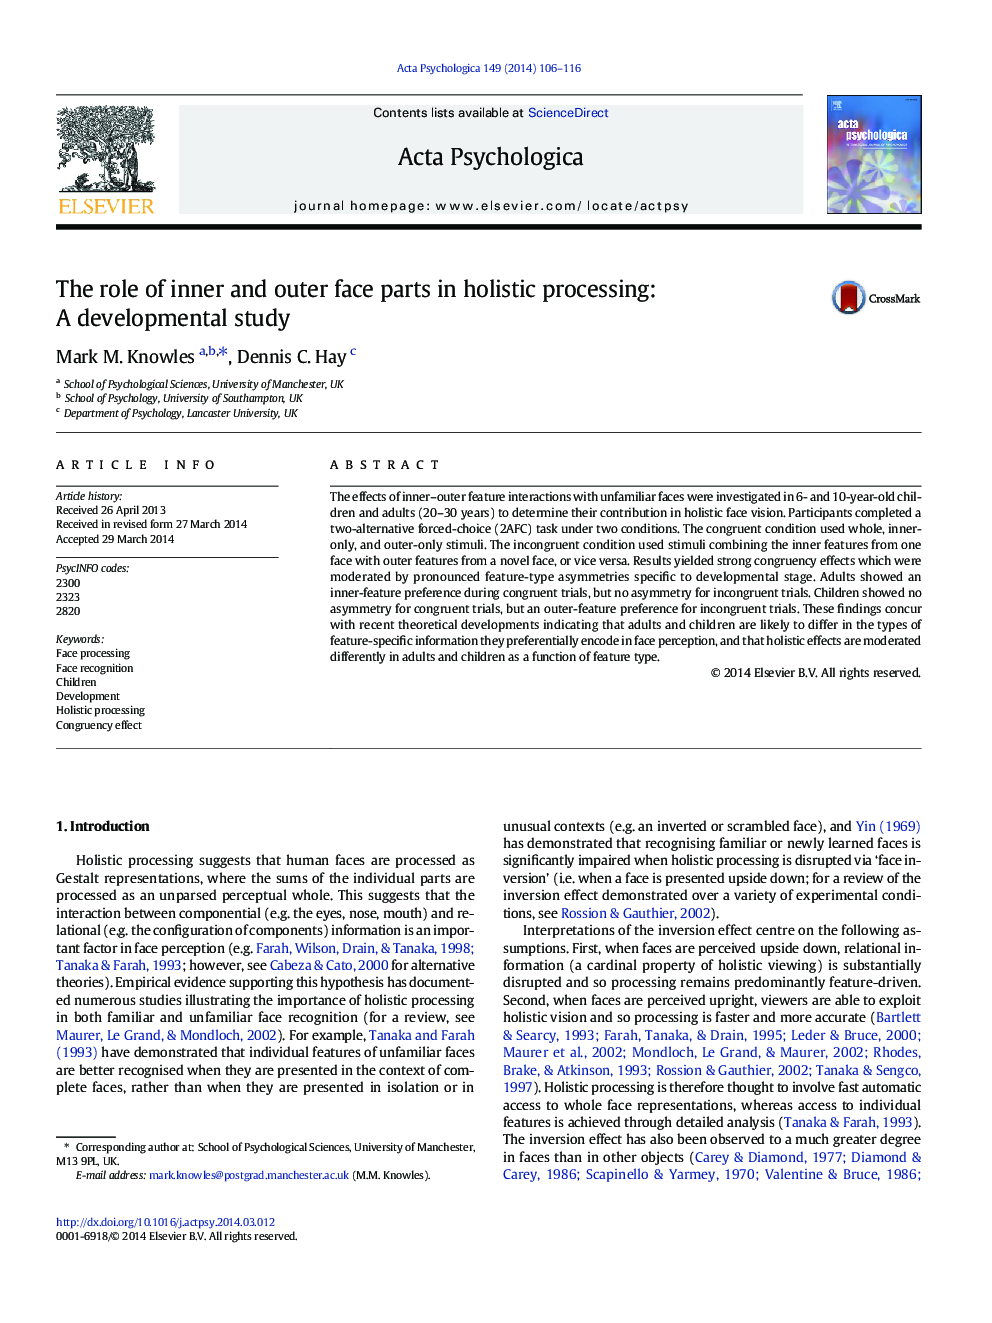 The role of inner and outer face parts in holistic processing: A developmental study